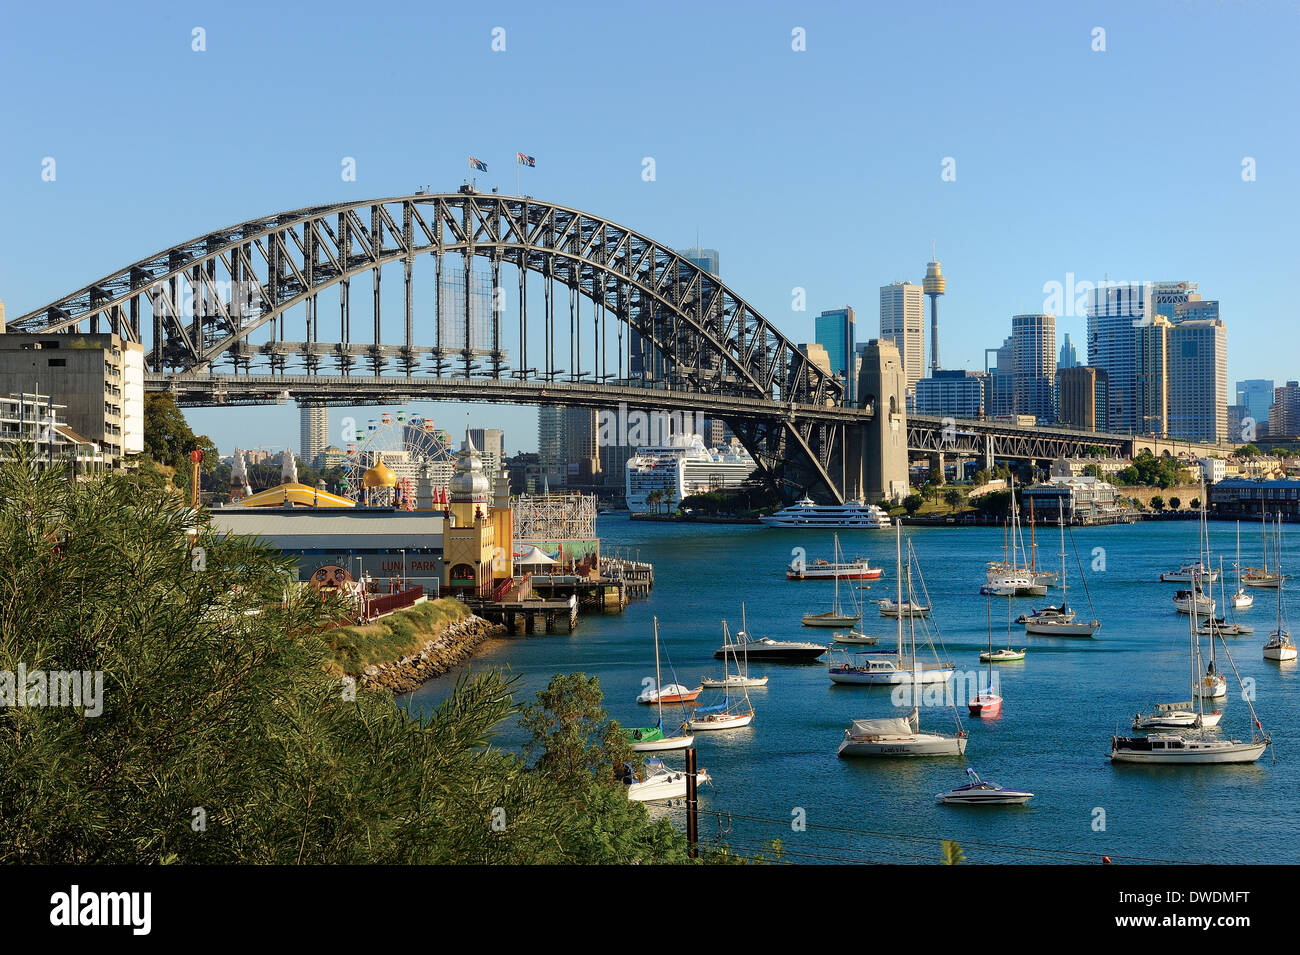 The Harbor Bridge of Sydney Australia and harbor showing Luna Park and small boats. Stock Photo